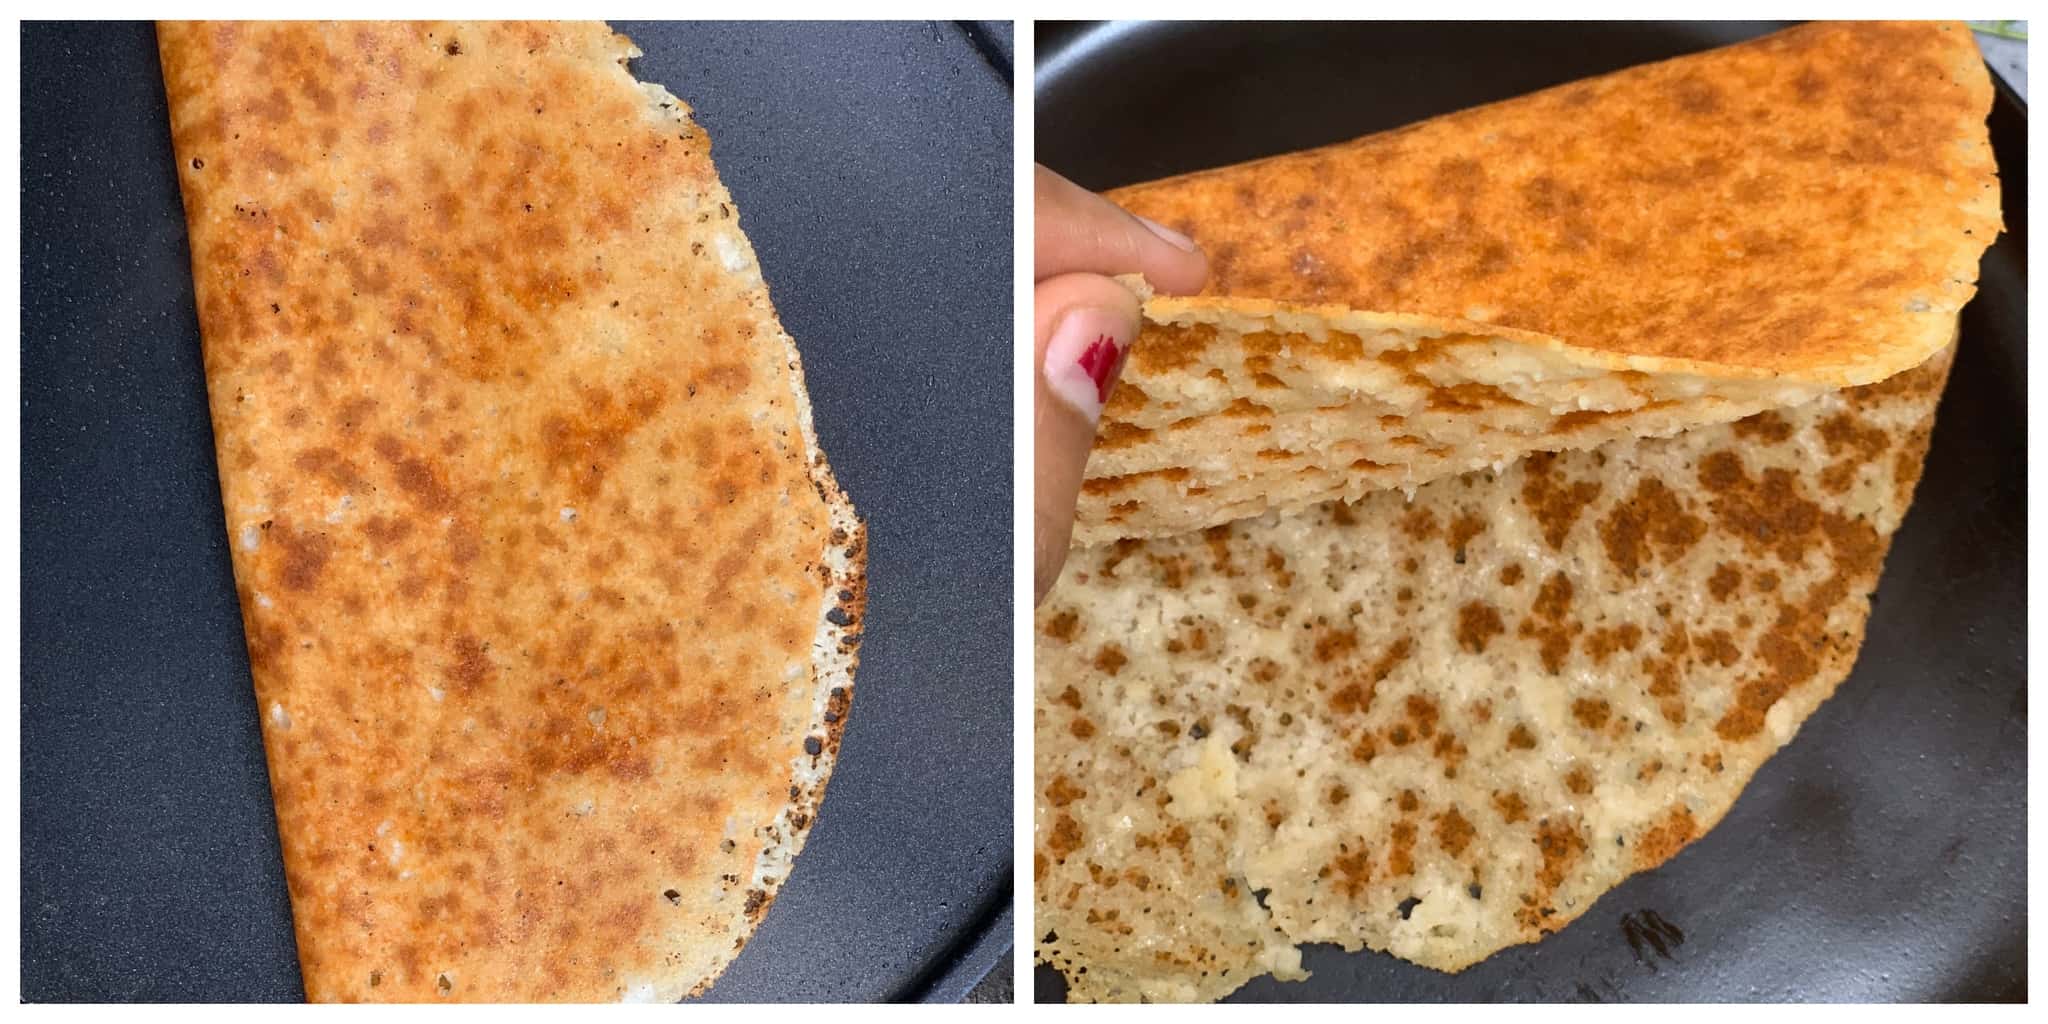 dosa is cooked crispy with golden brown spots collage